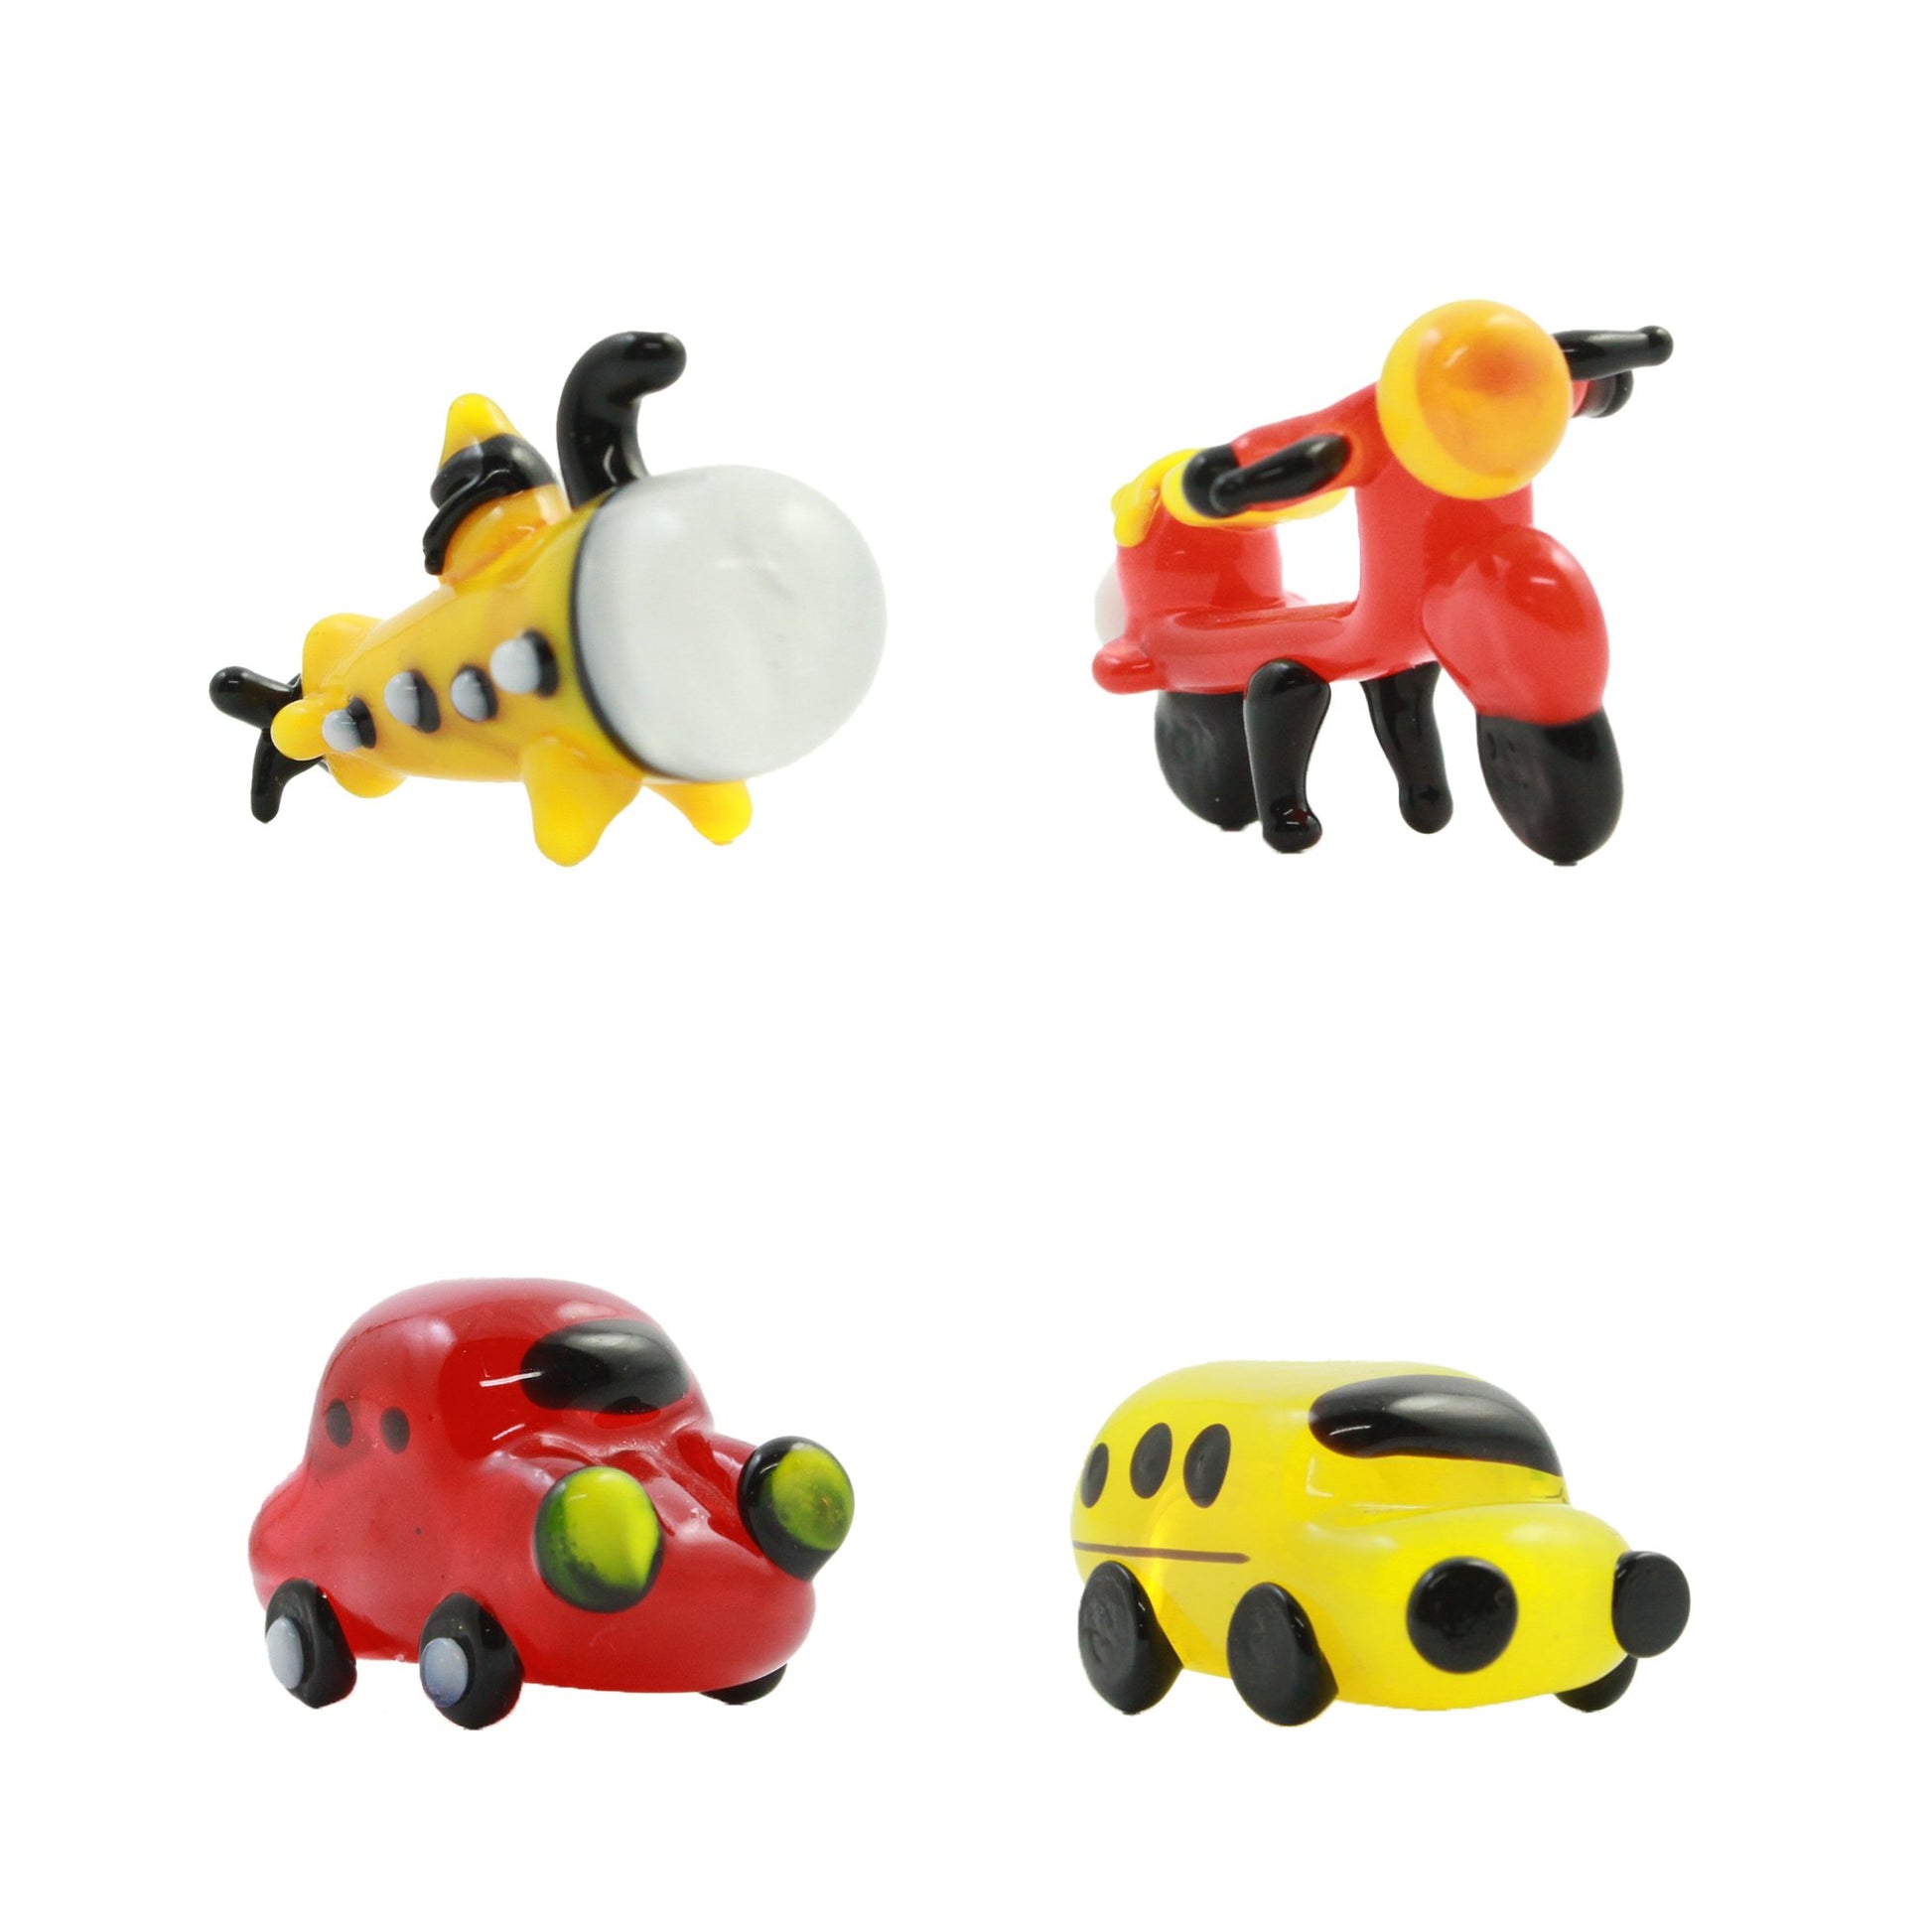 LookingGlass Vehicles 2 Set Minature Glass Collectibles Product Image